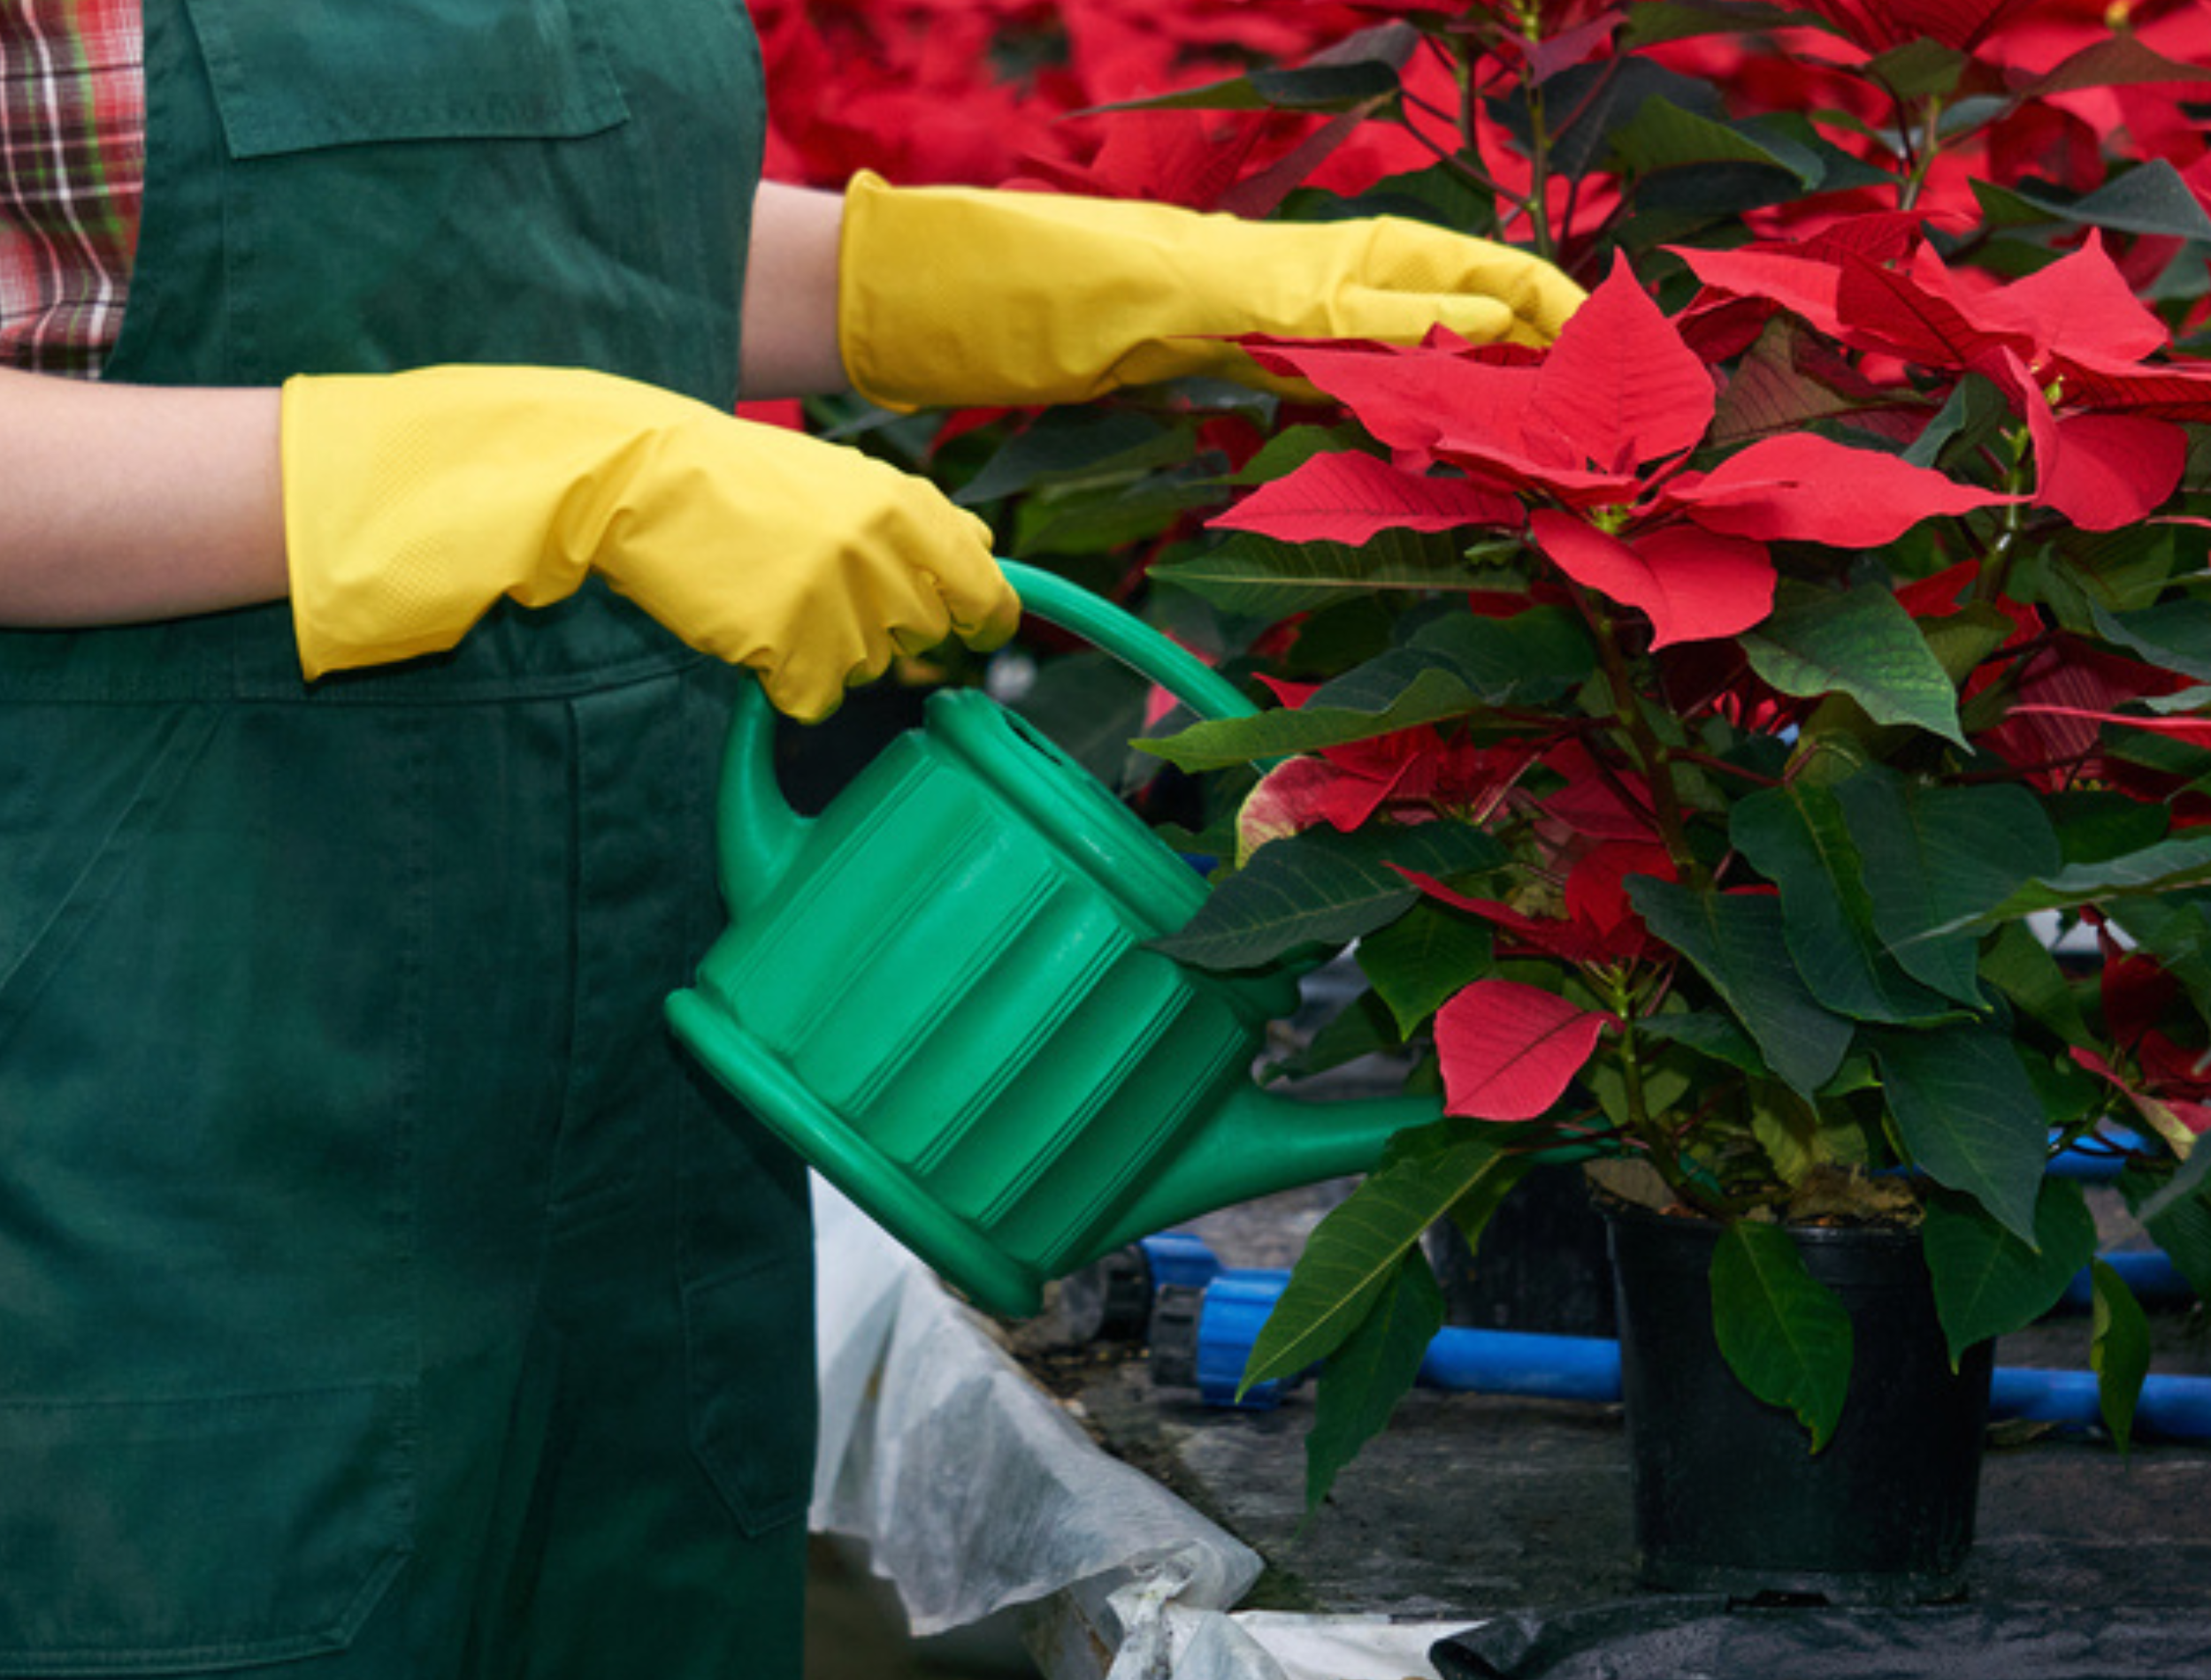 woman florist in a greenhouse takes care of poinsettia flowers by applying fertilizers or pesticides to the soil